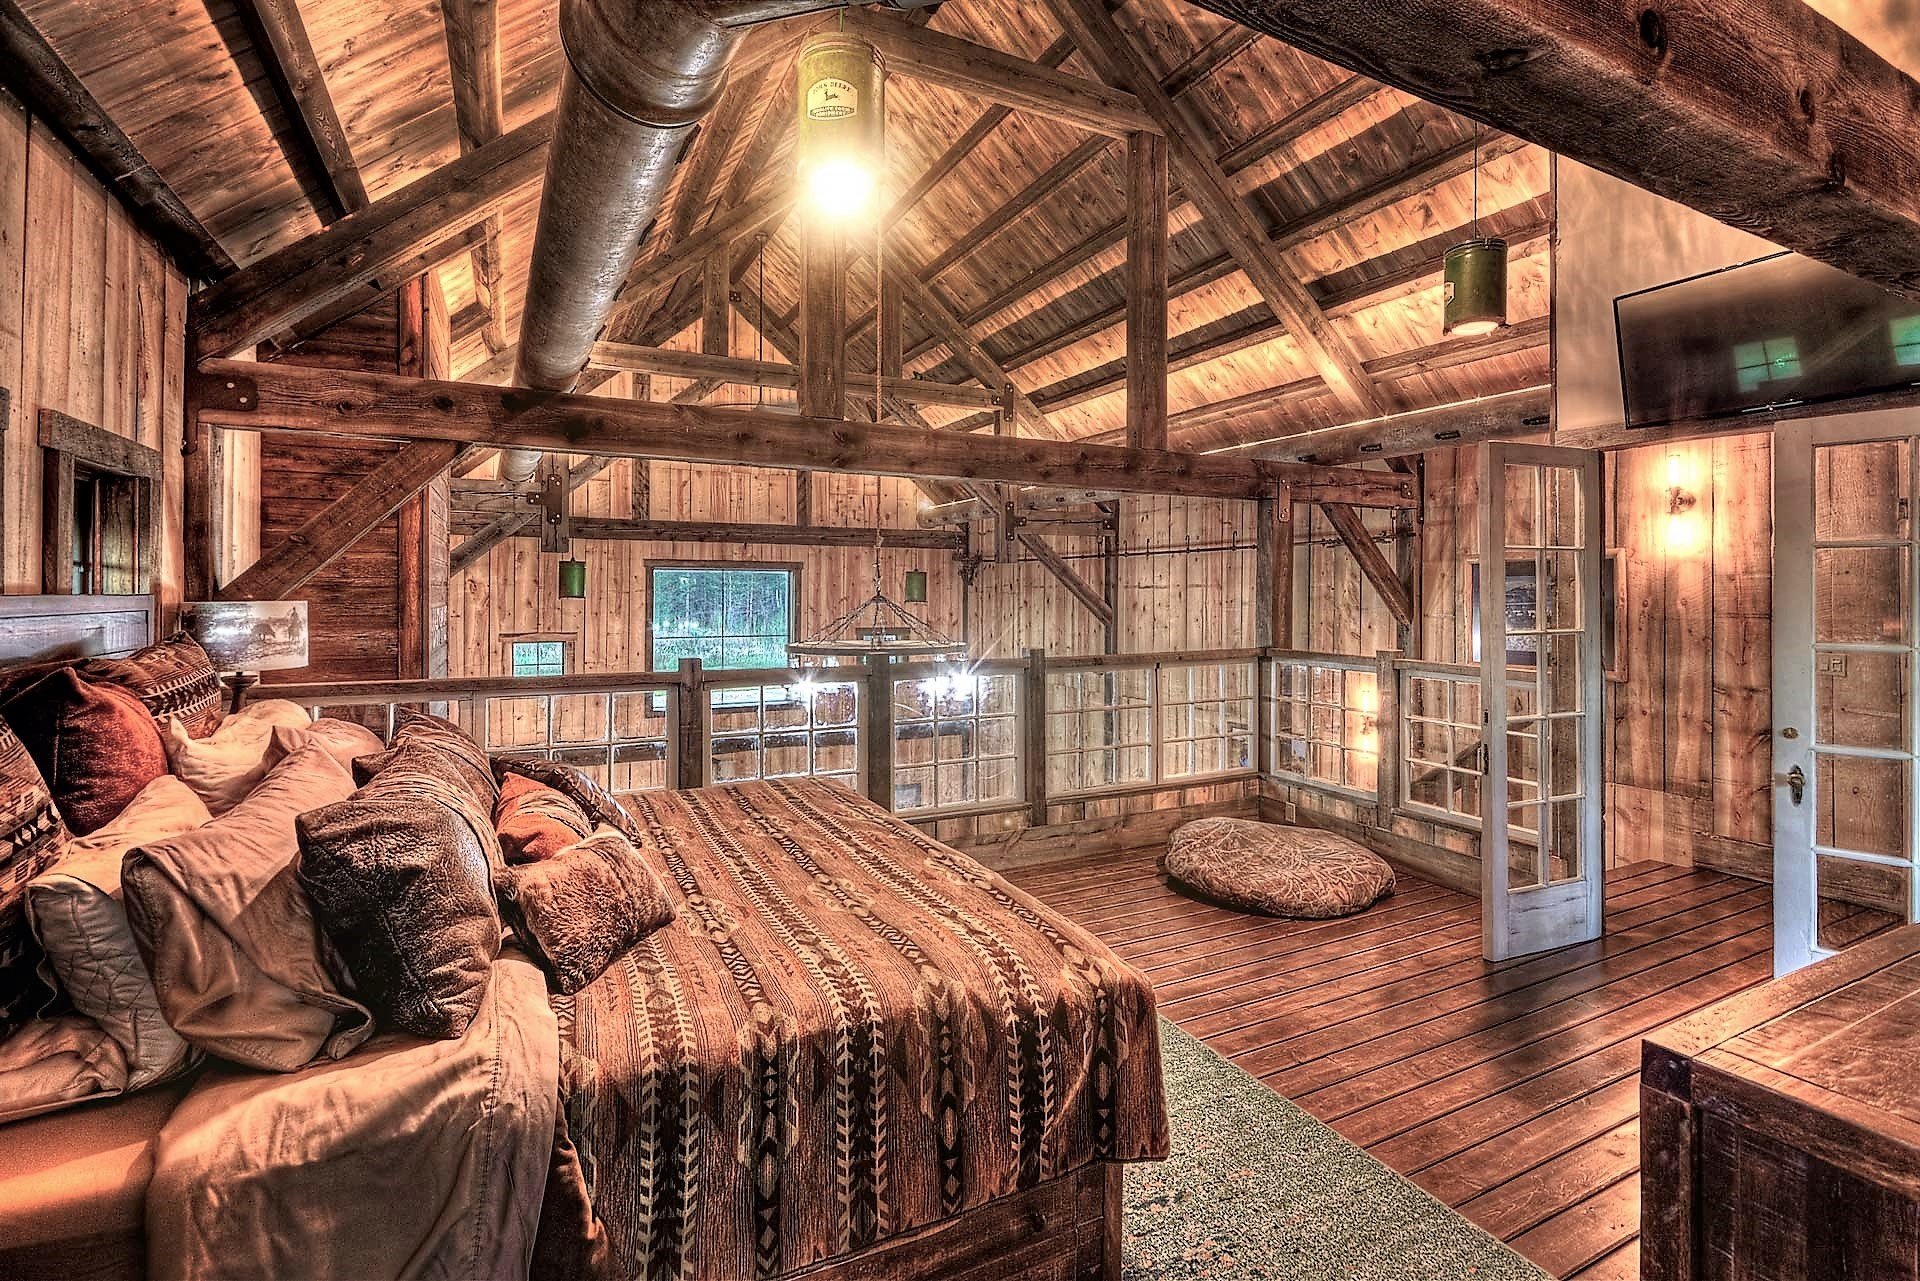 31 More Of The Absolute Best Barndominium Pictures On The Planet With